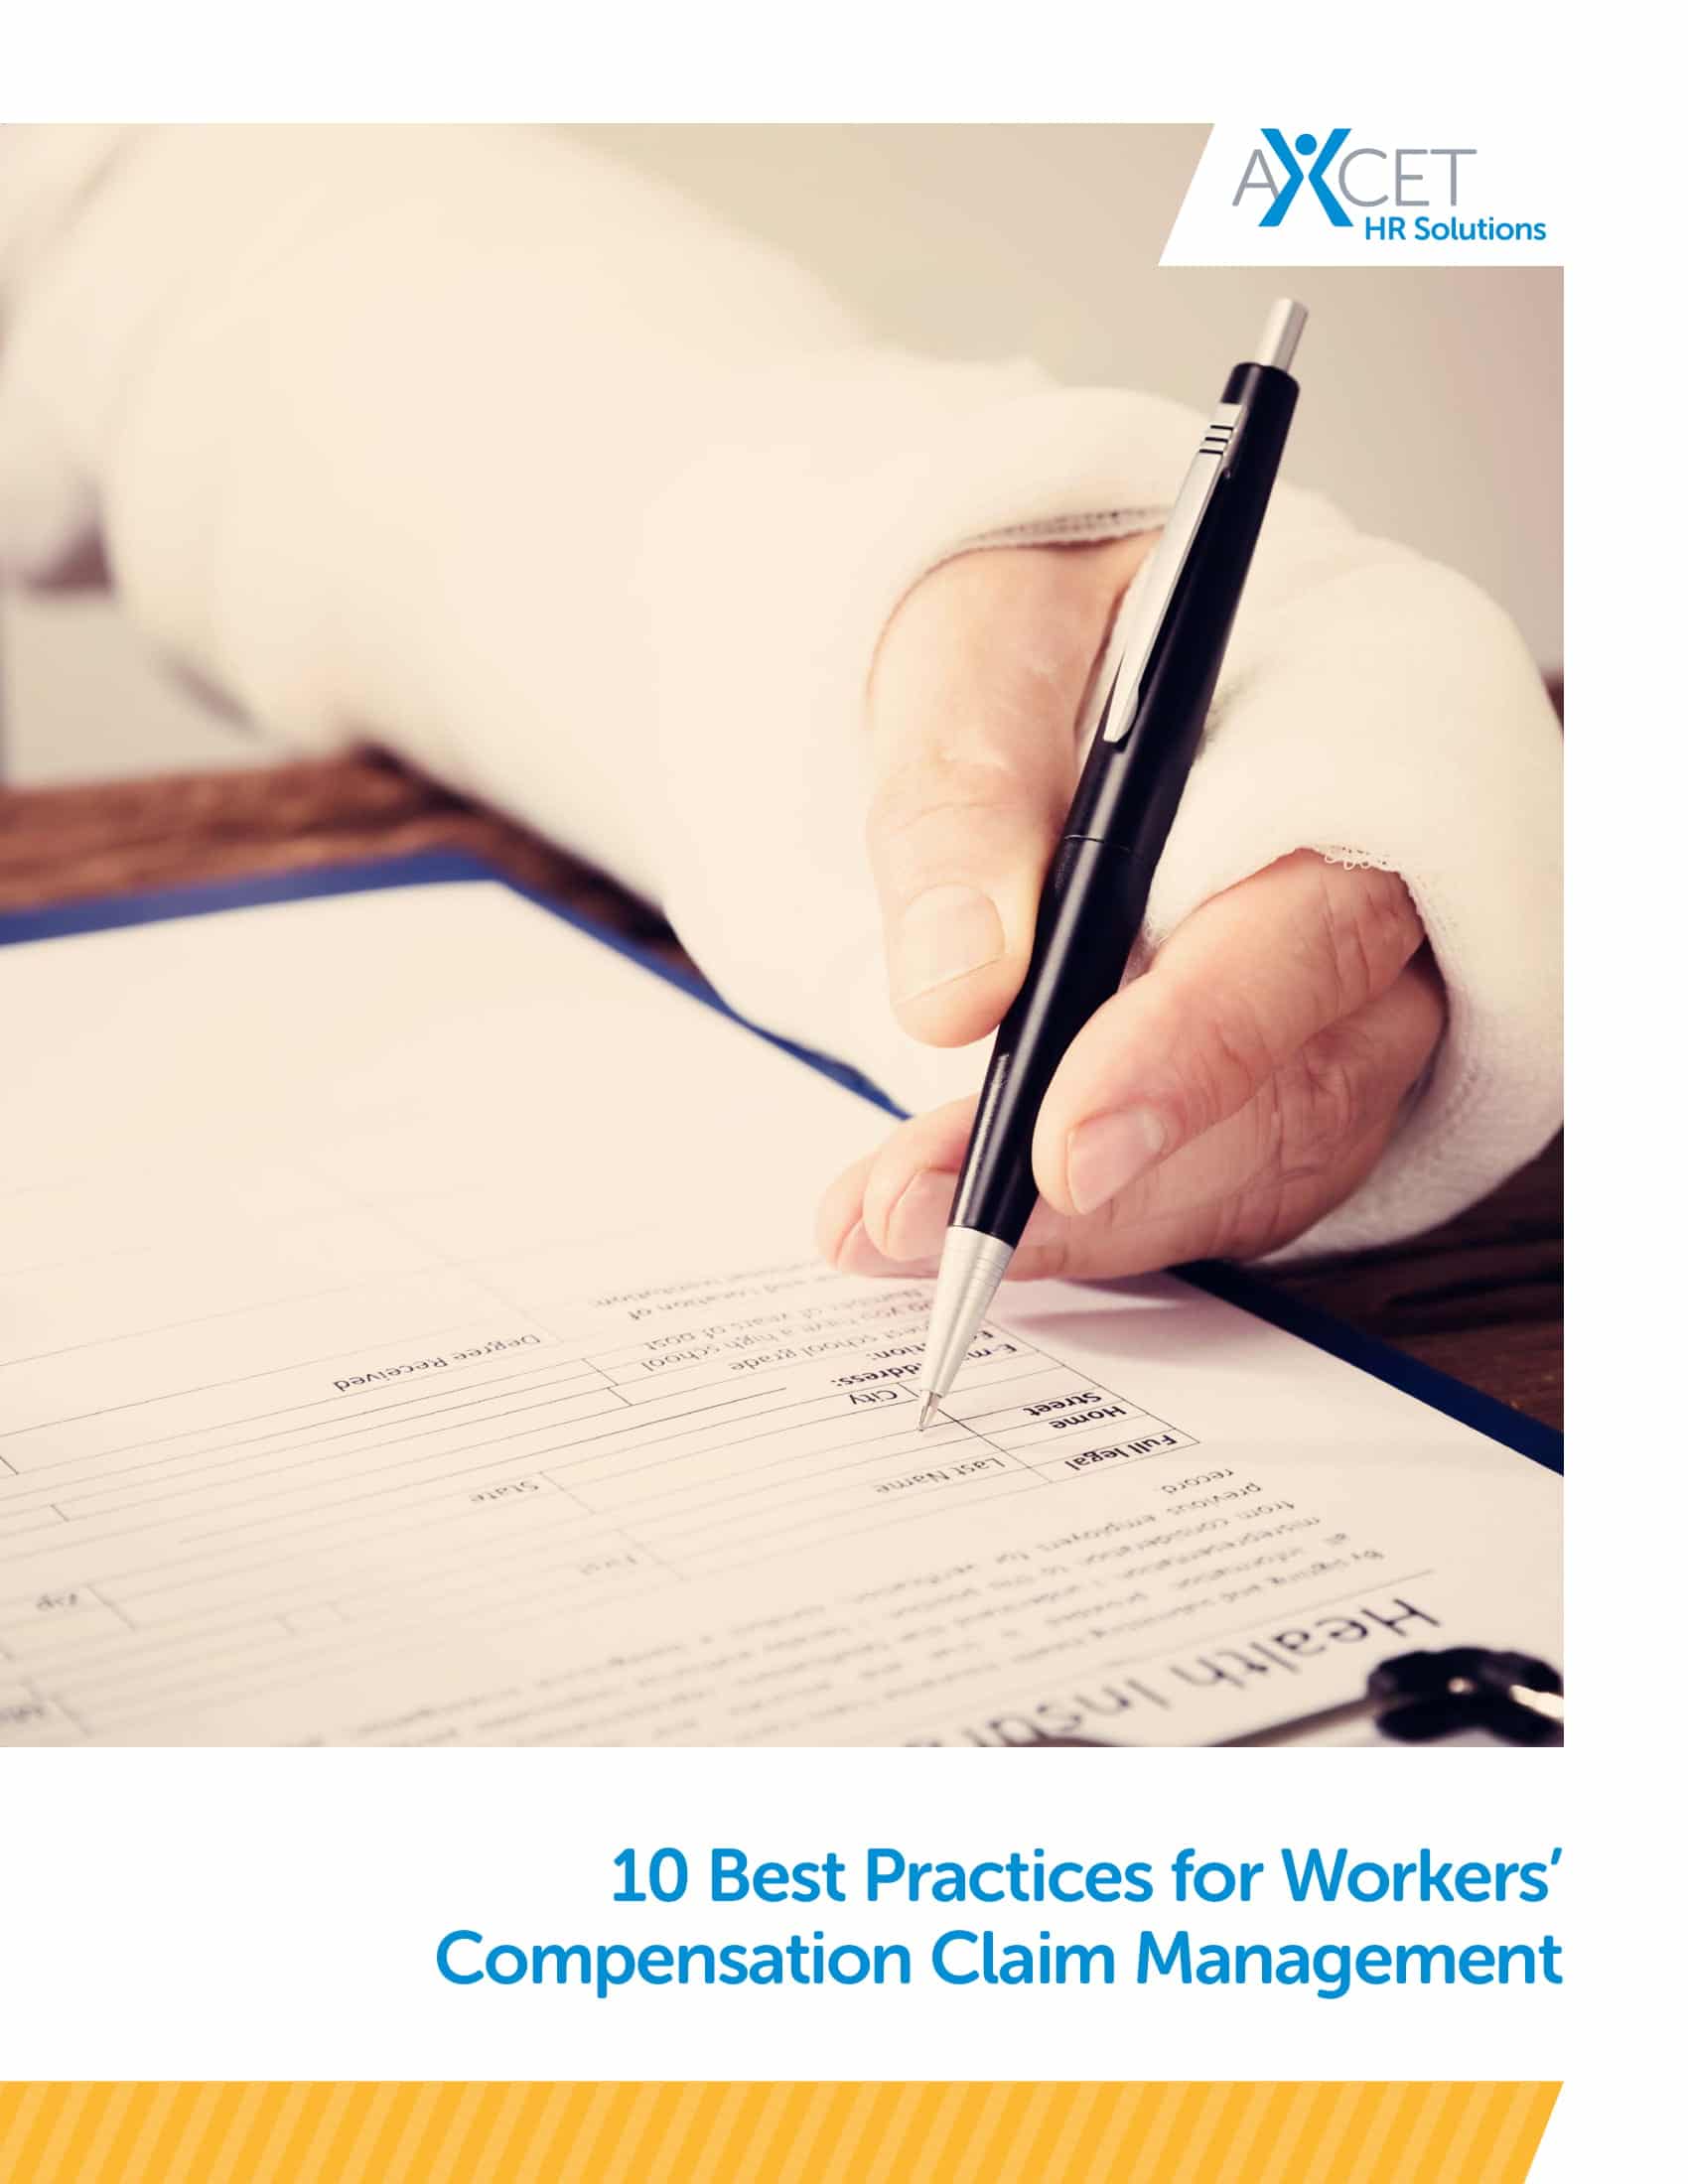 10 Best Practices for Workers' Compensation Claim Management